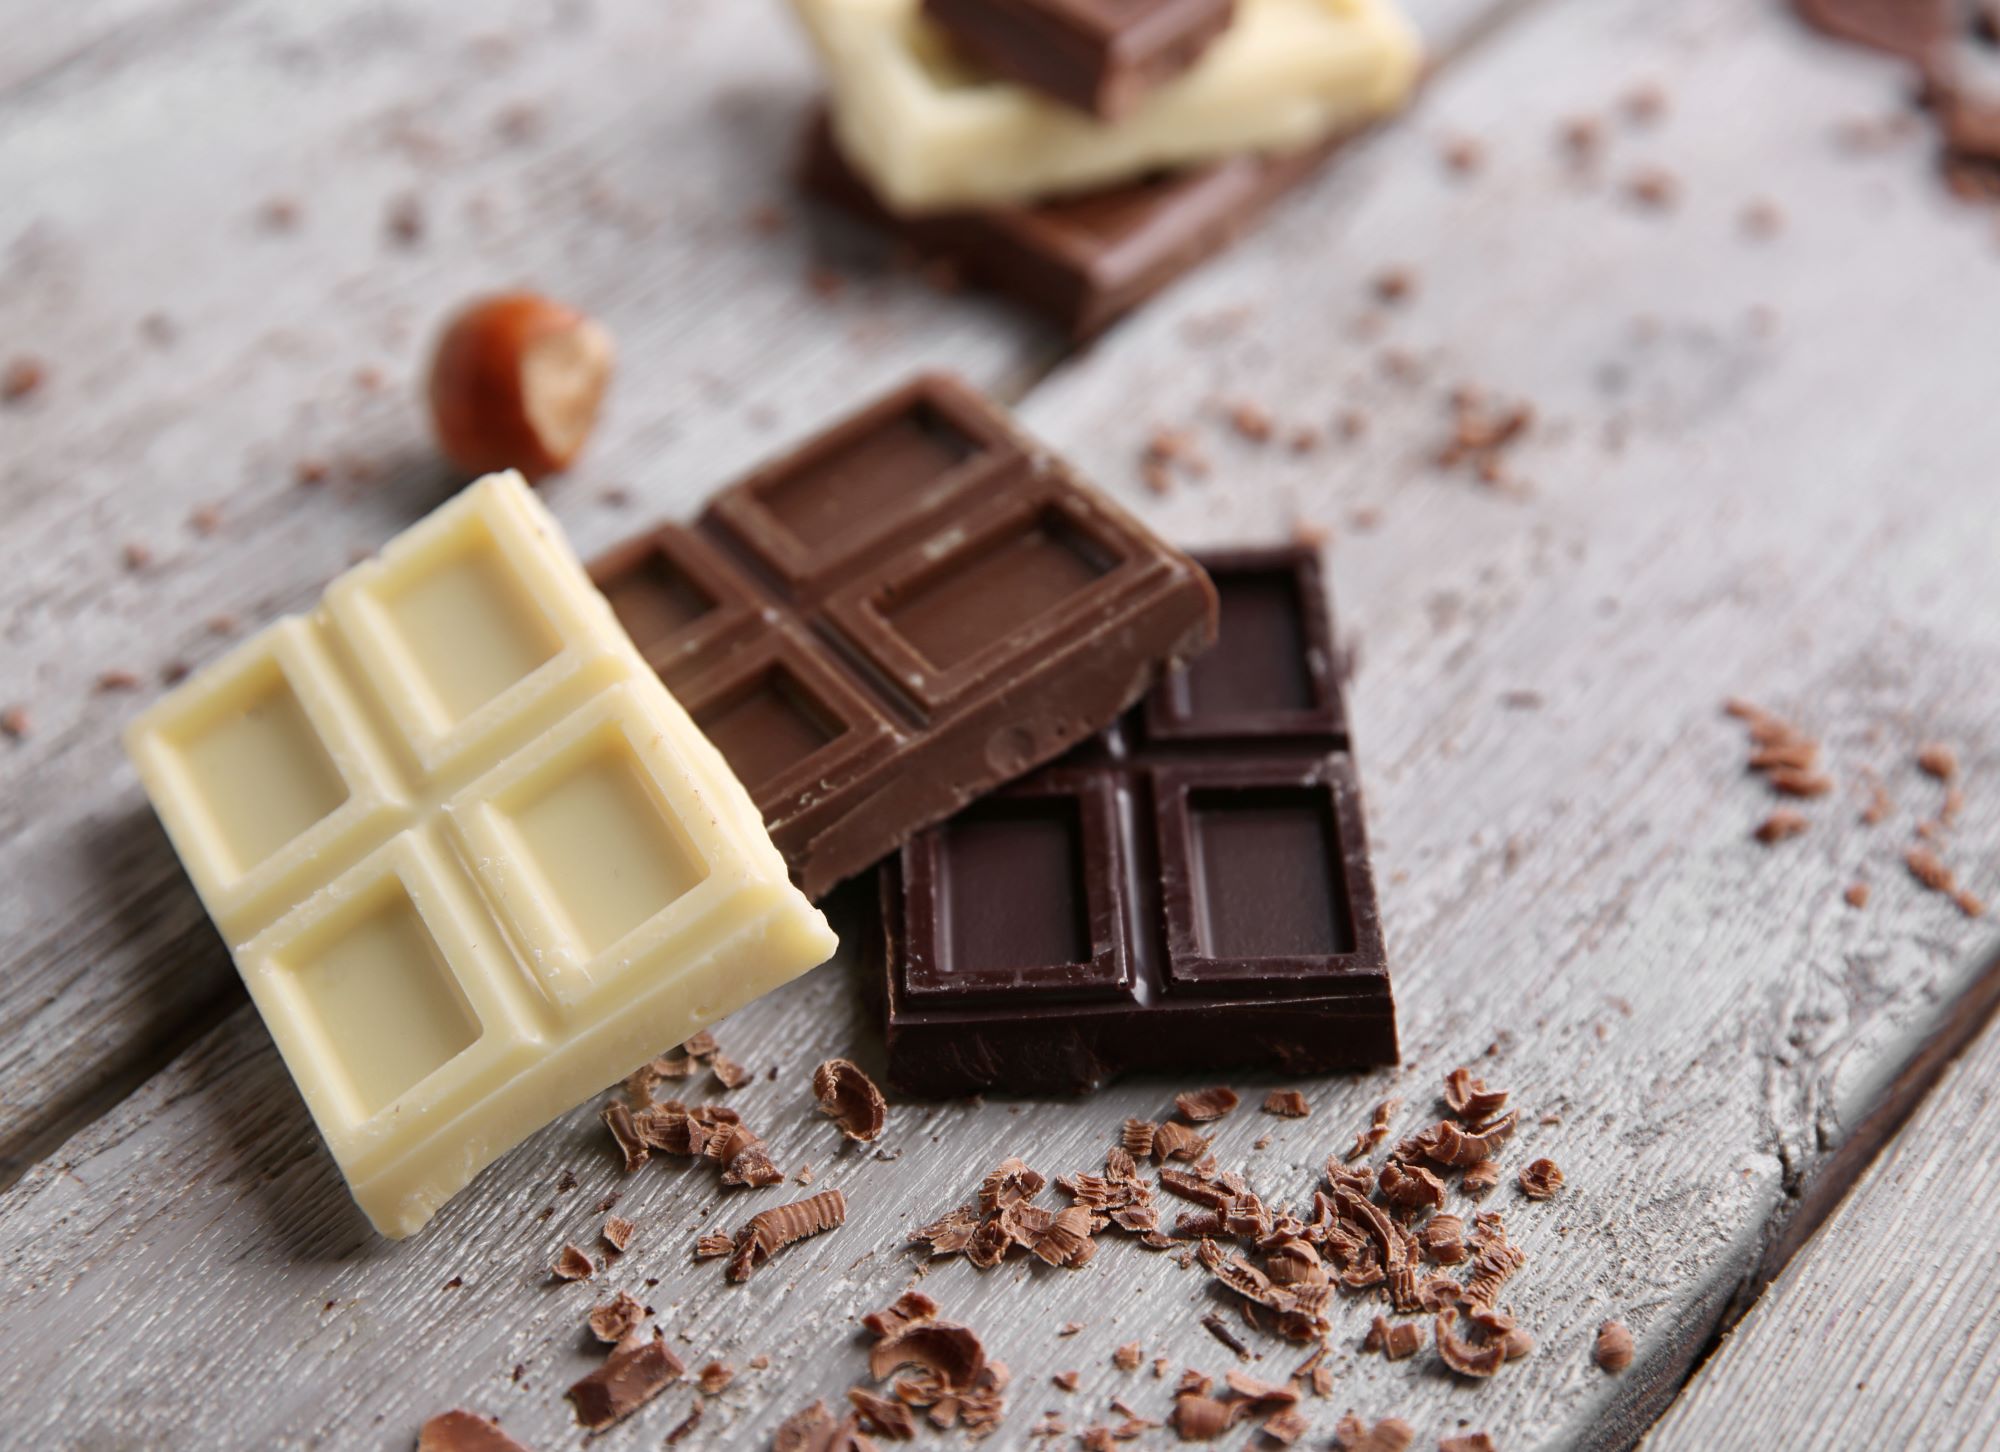 What Makes Chocolate So Appealing May Also Make It Bad